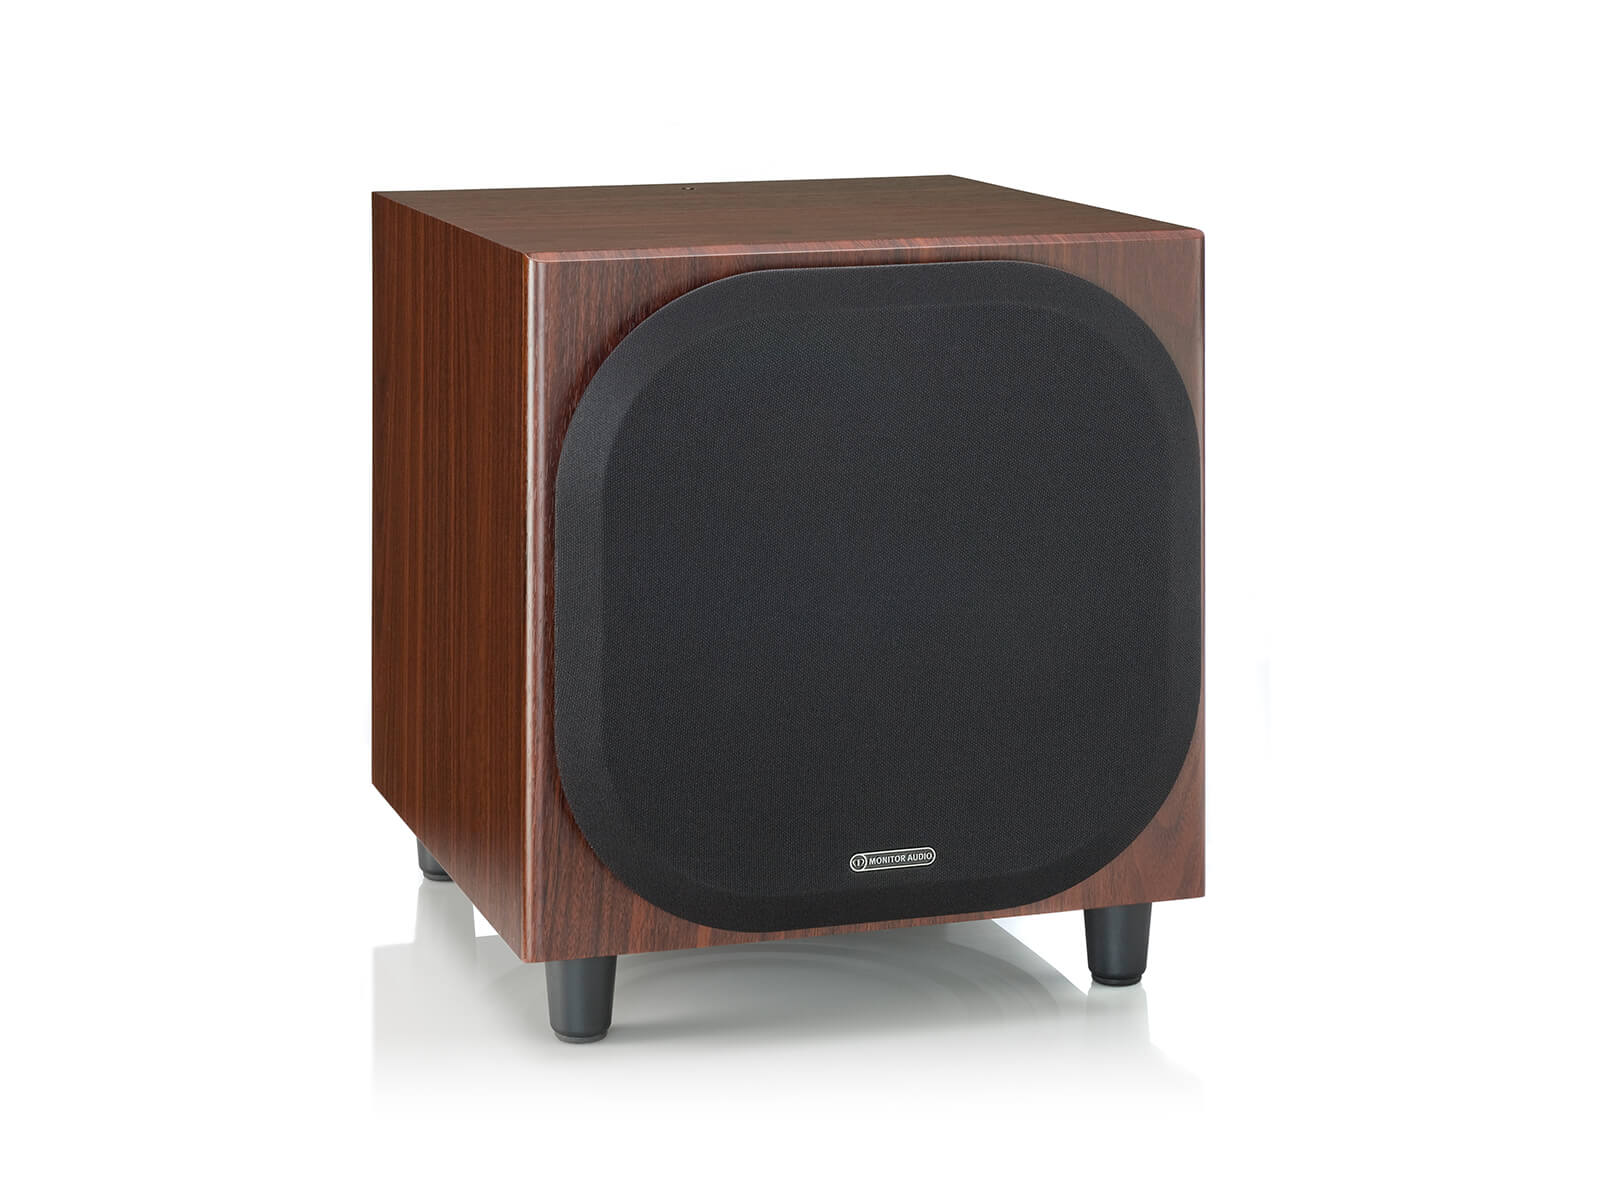 Bronze W10 subwoofer, featuring a grille and a rosemah vinyl finish.